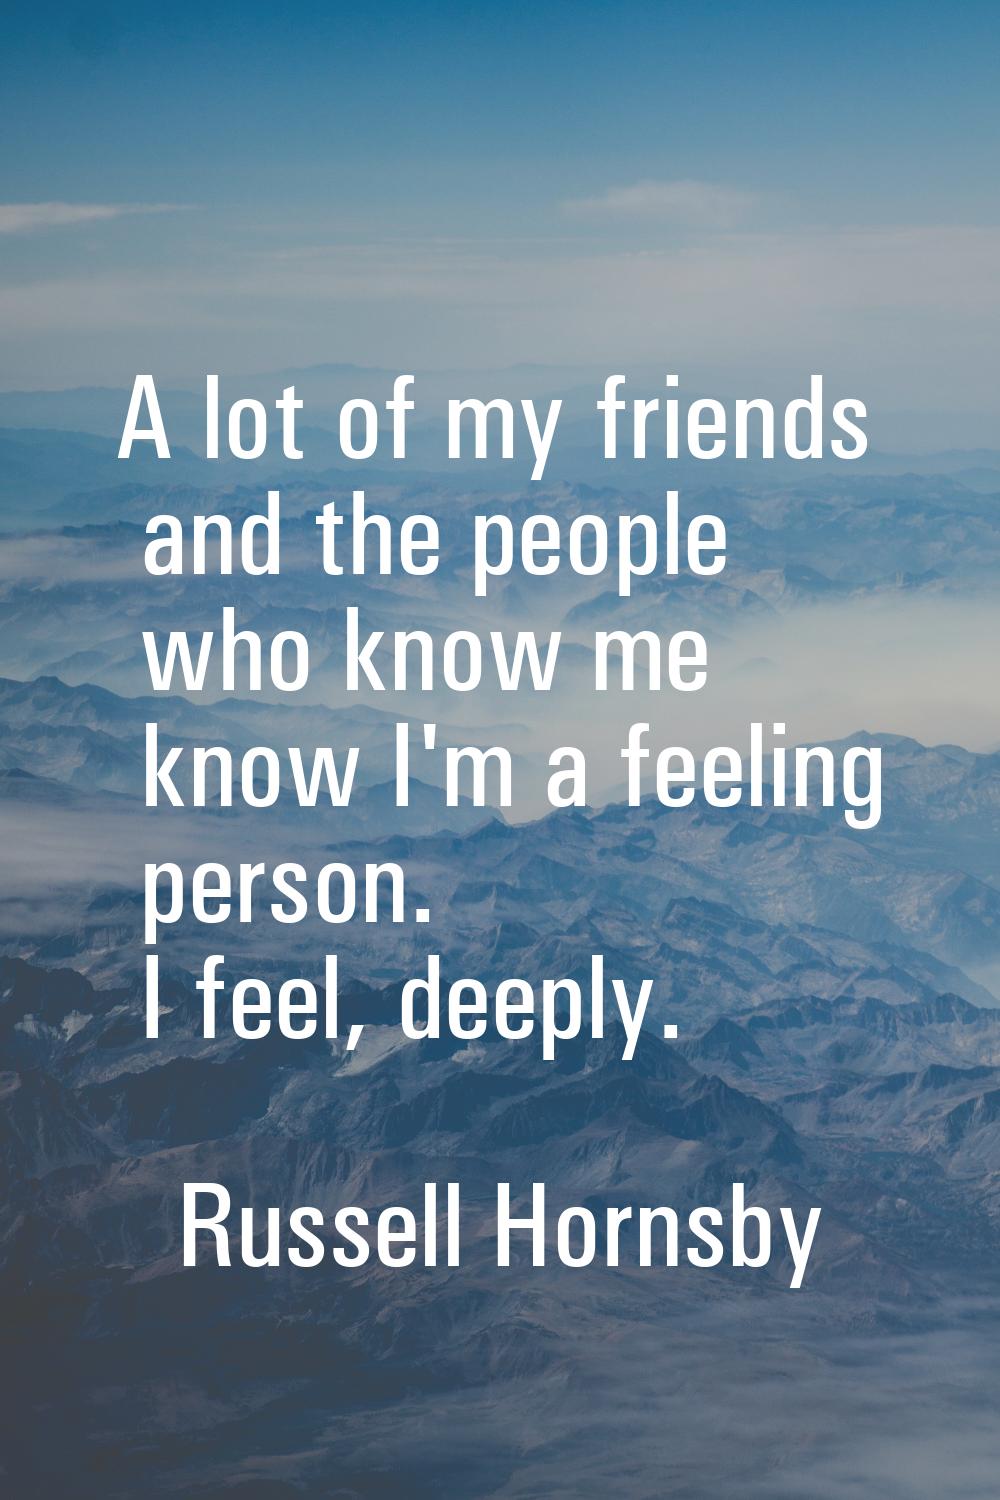 A lot of my friends and the people who know me know I'm a feeling person. I feel, deeply.